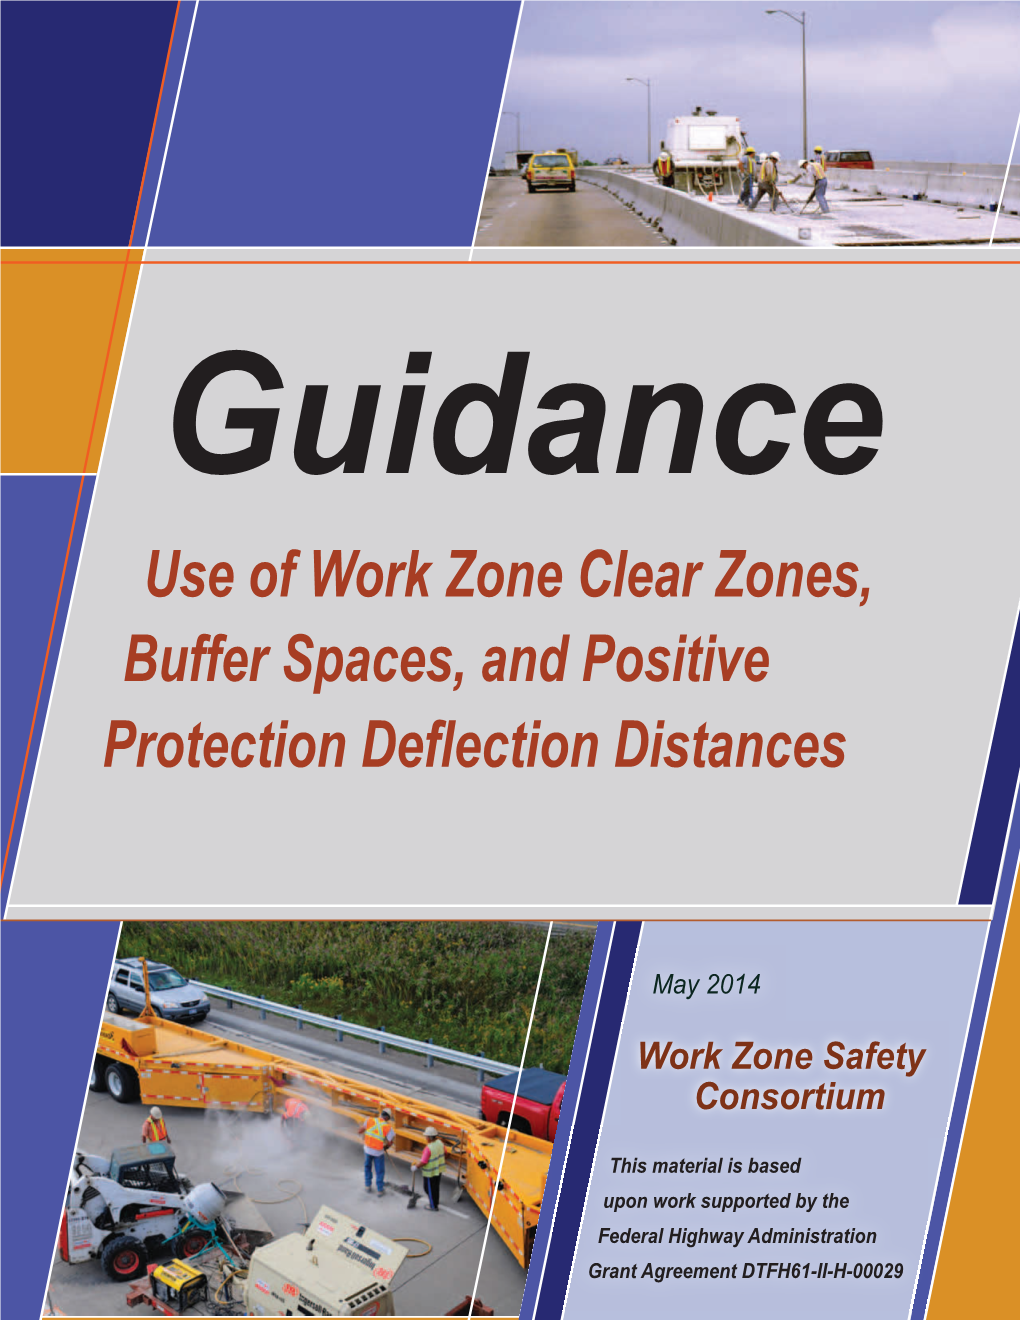 Use of Work Zone Clear Zones, Buffer Spaces, and Positive Protection Deflection Distances